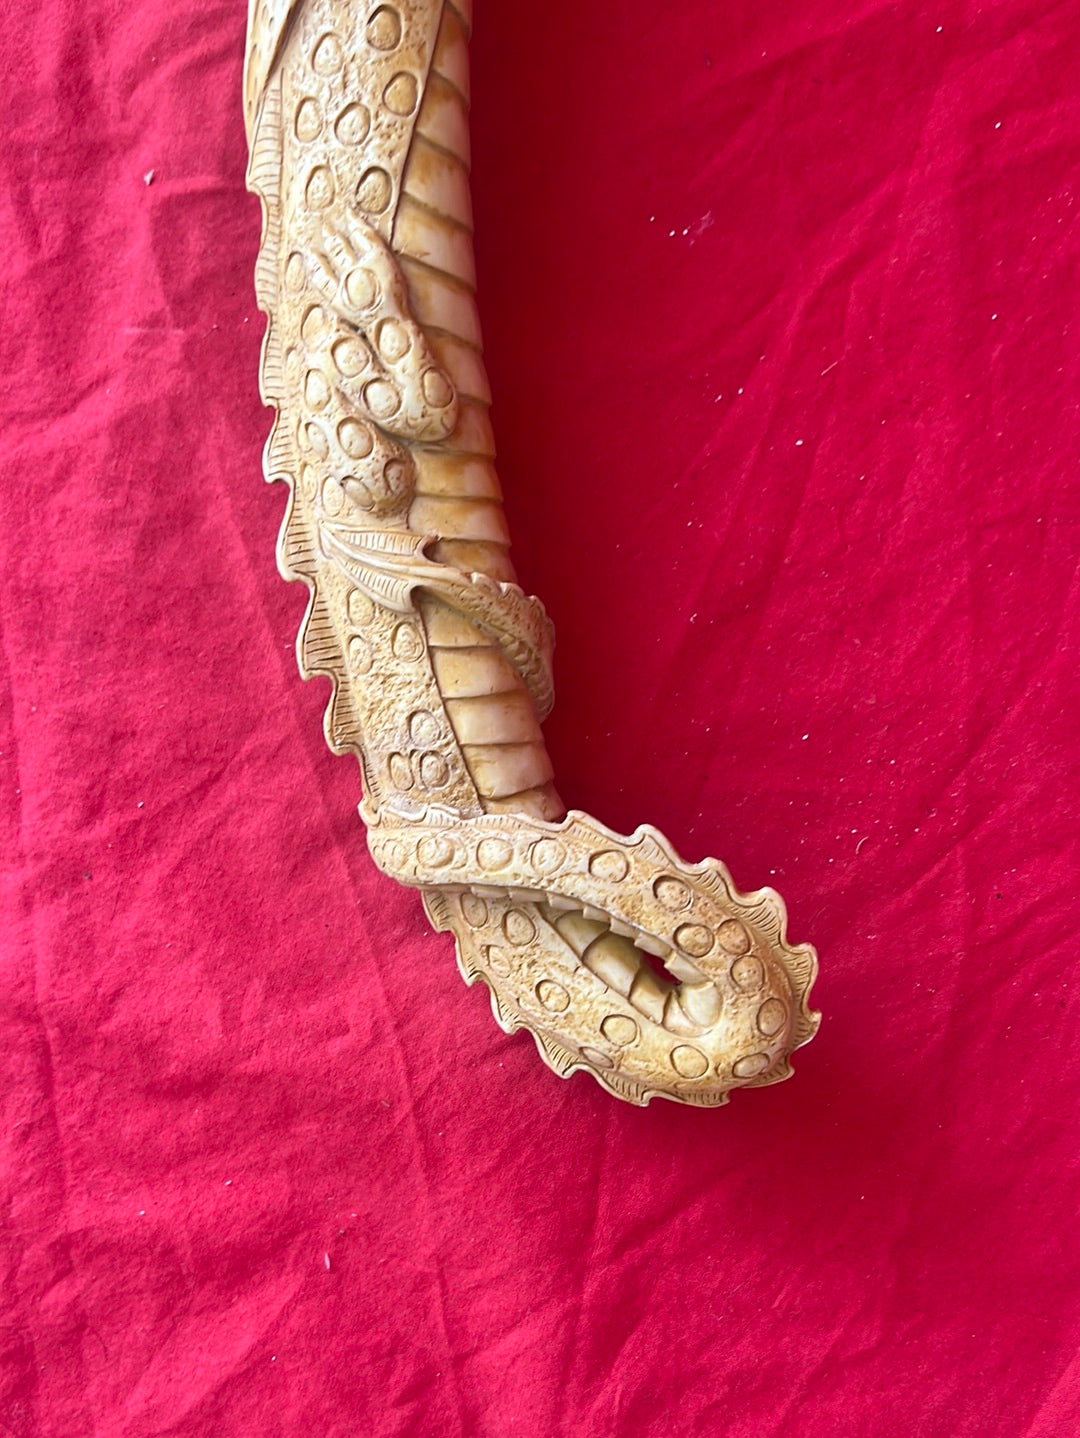 Dragon Dagger with Carved Resin Handle and Sheath